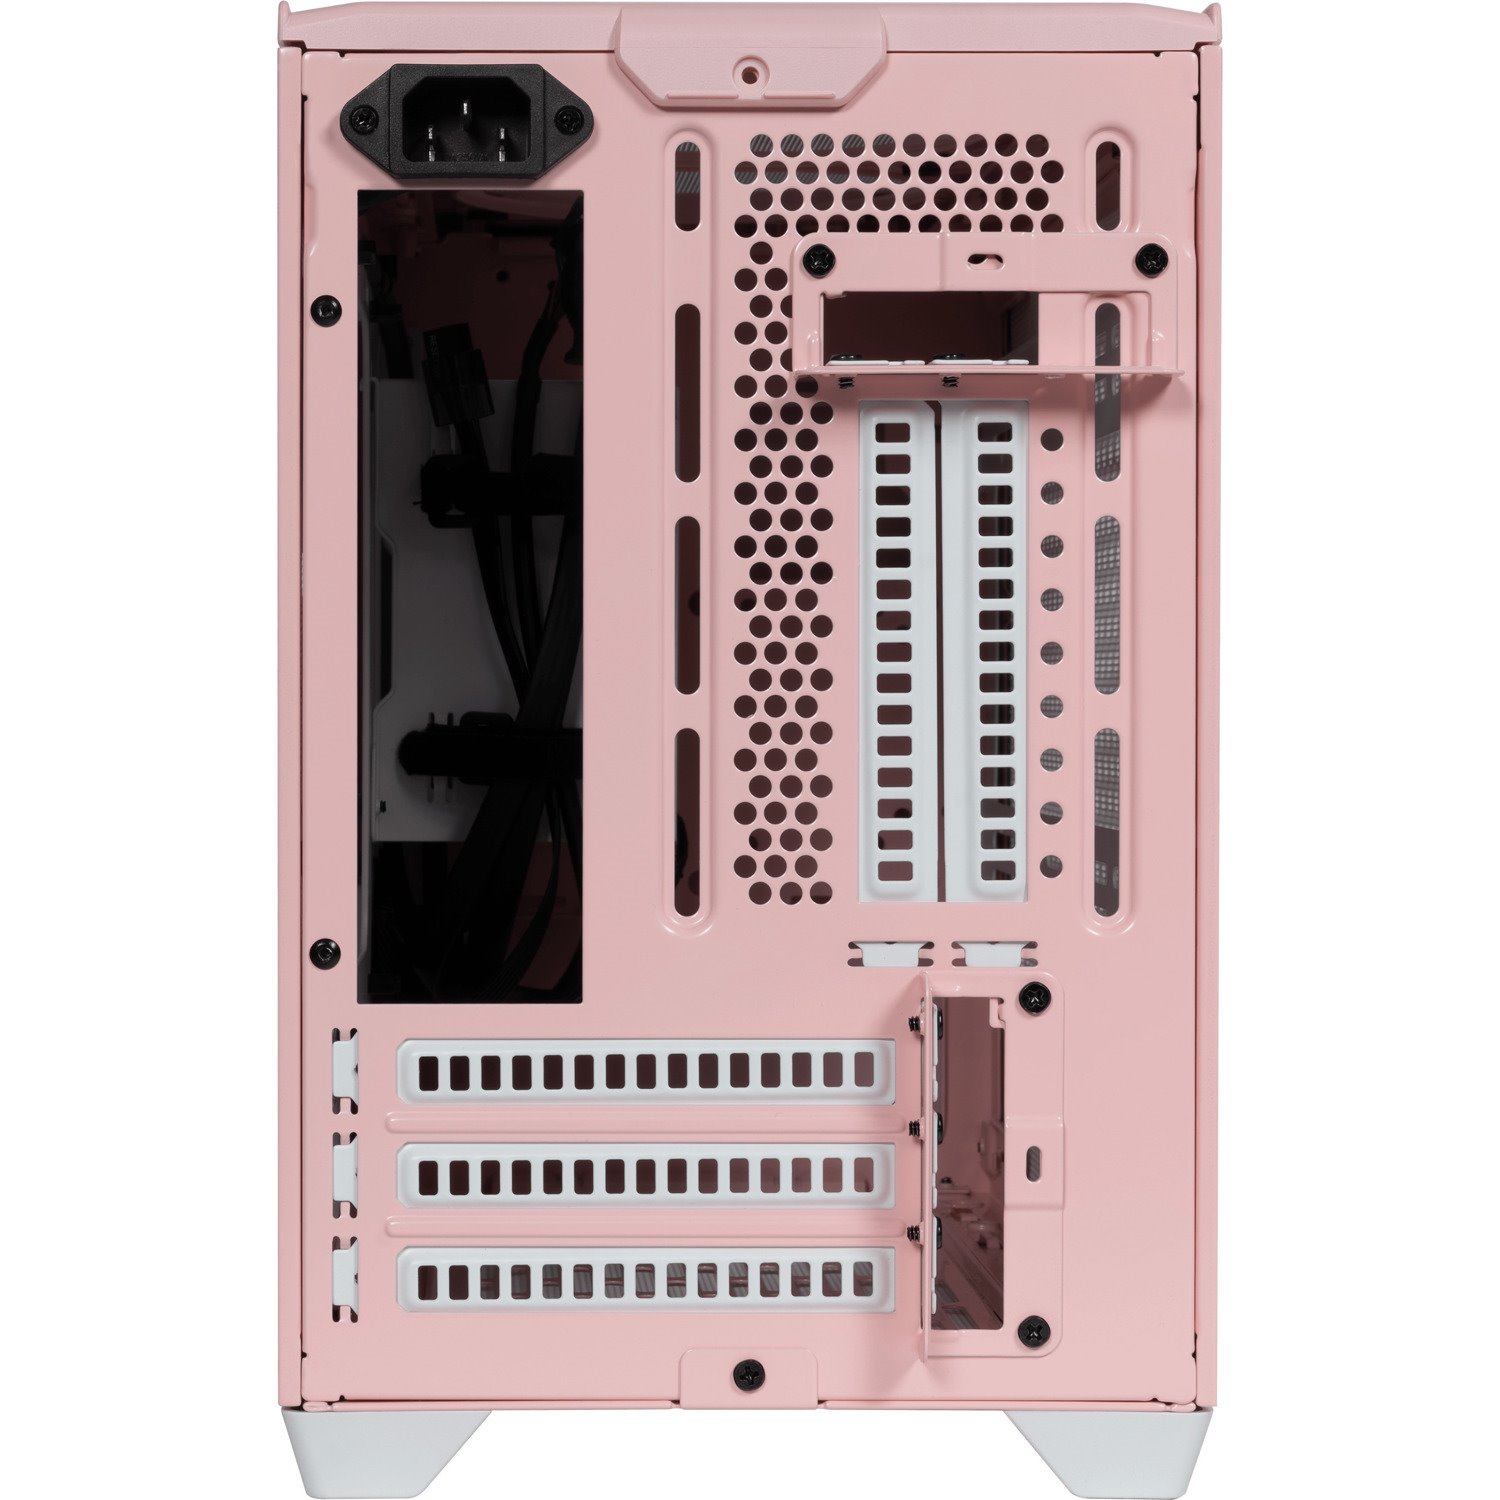 Cooler Master MasterBox MCB-NR200P-QCNN-S00 Computer Case - Mini ITX, Mini DTX Motherboard Supported - Tempered Glass, Mesh, Plastic, Steel - Flamingo Pink